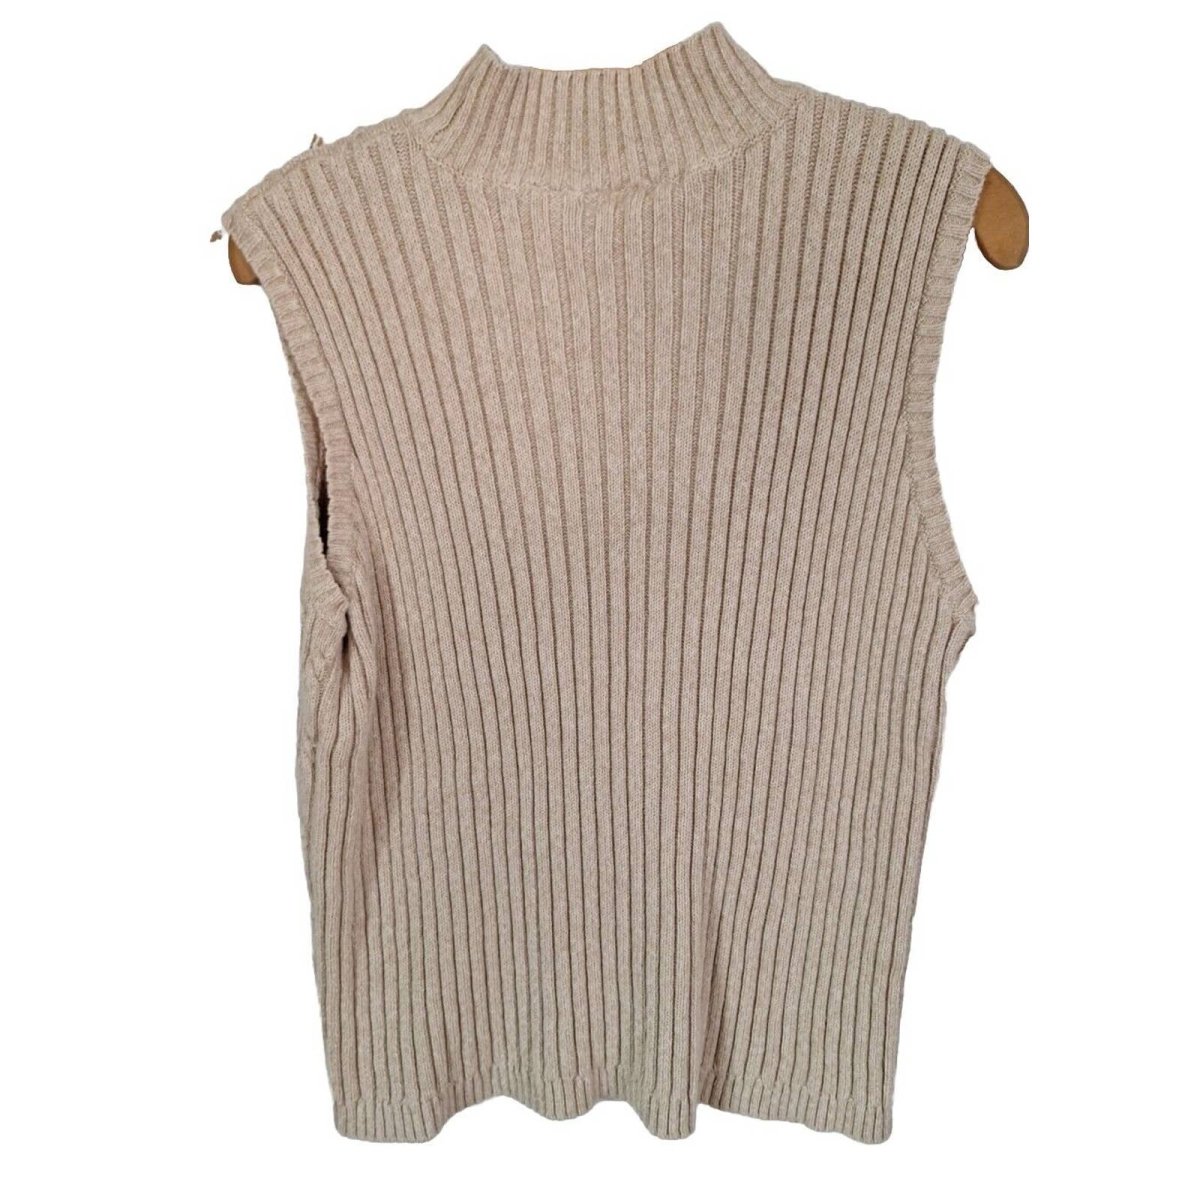 90s/Y2K Beige Ramie Cableknit Mockneck Top Women's Size XL Chest 42" to 52" - themallvintage The Mall Vintage